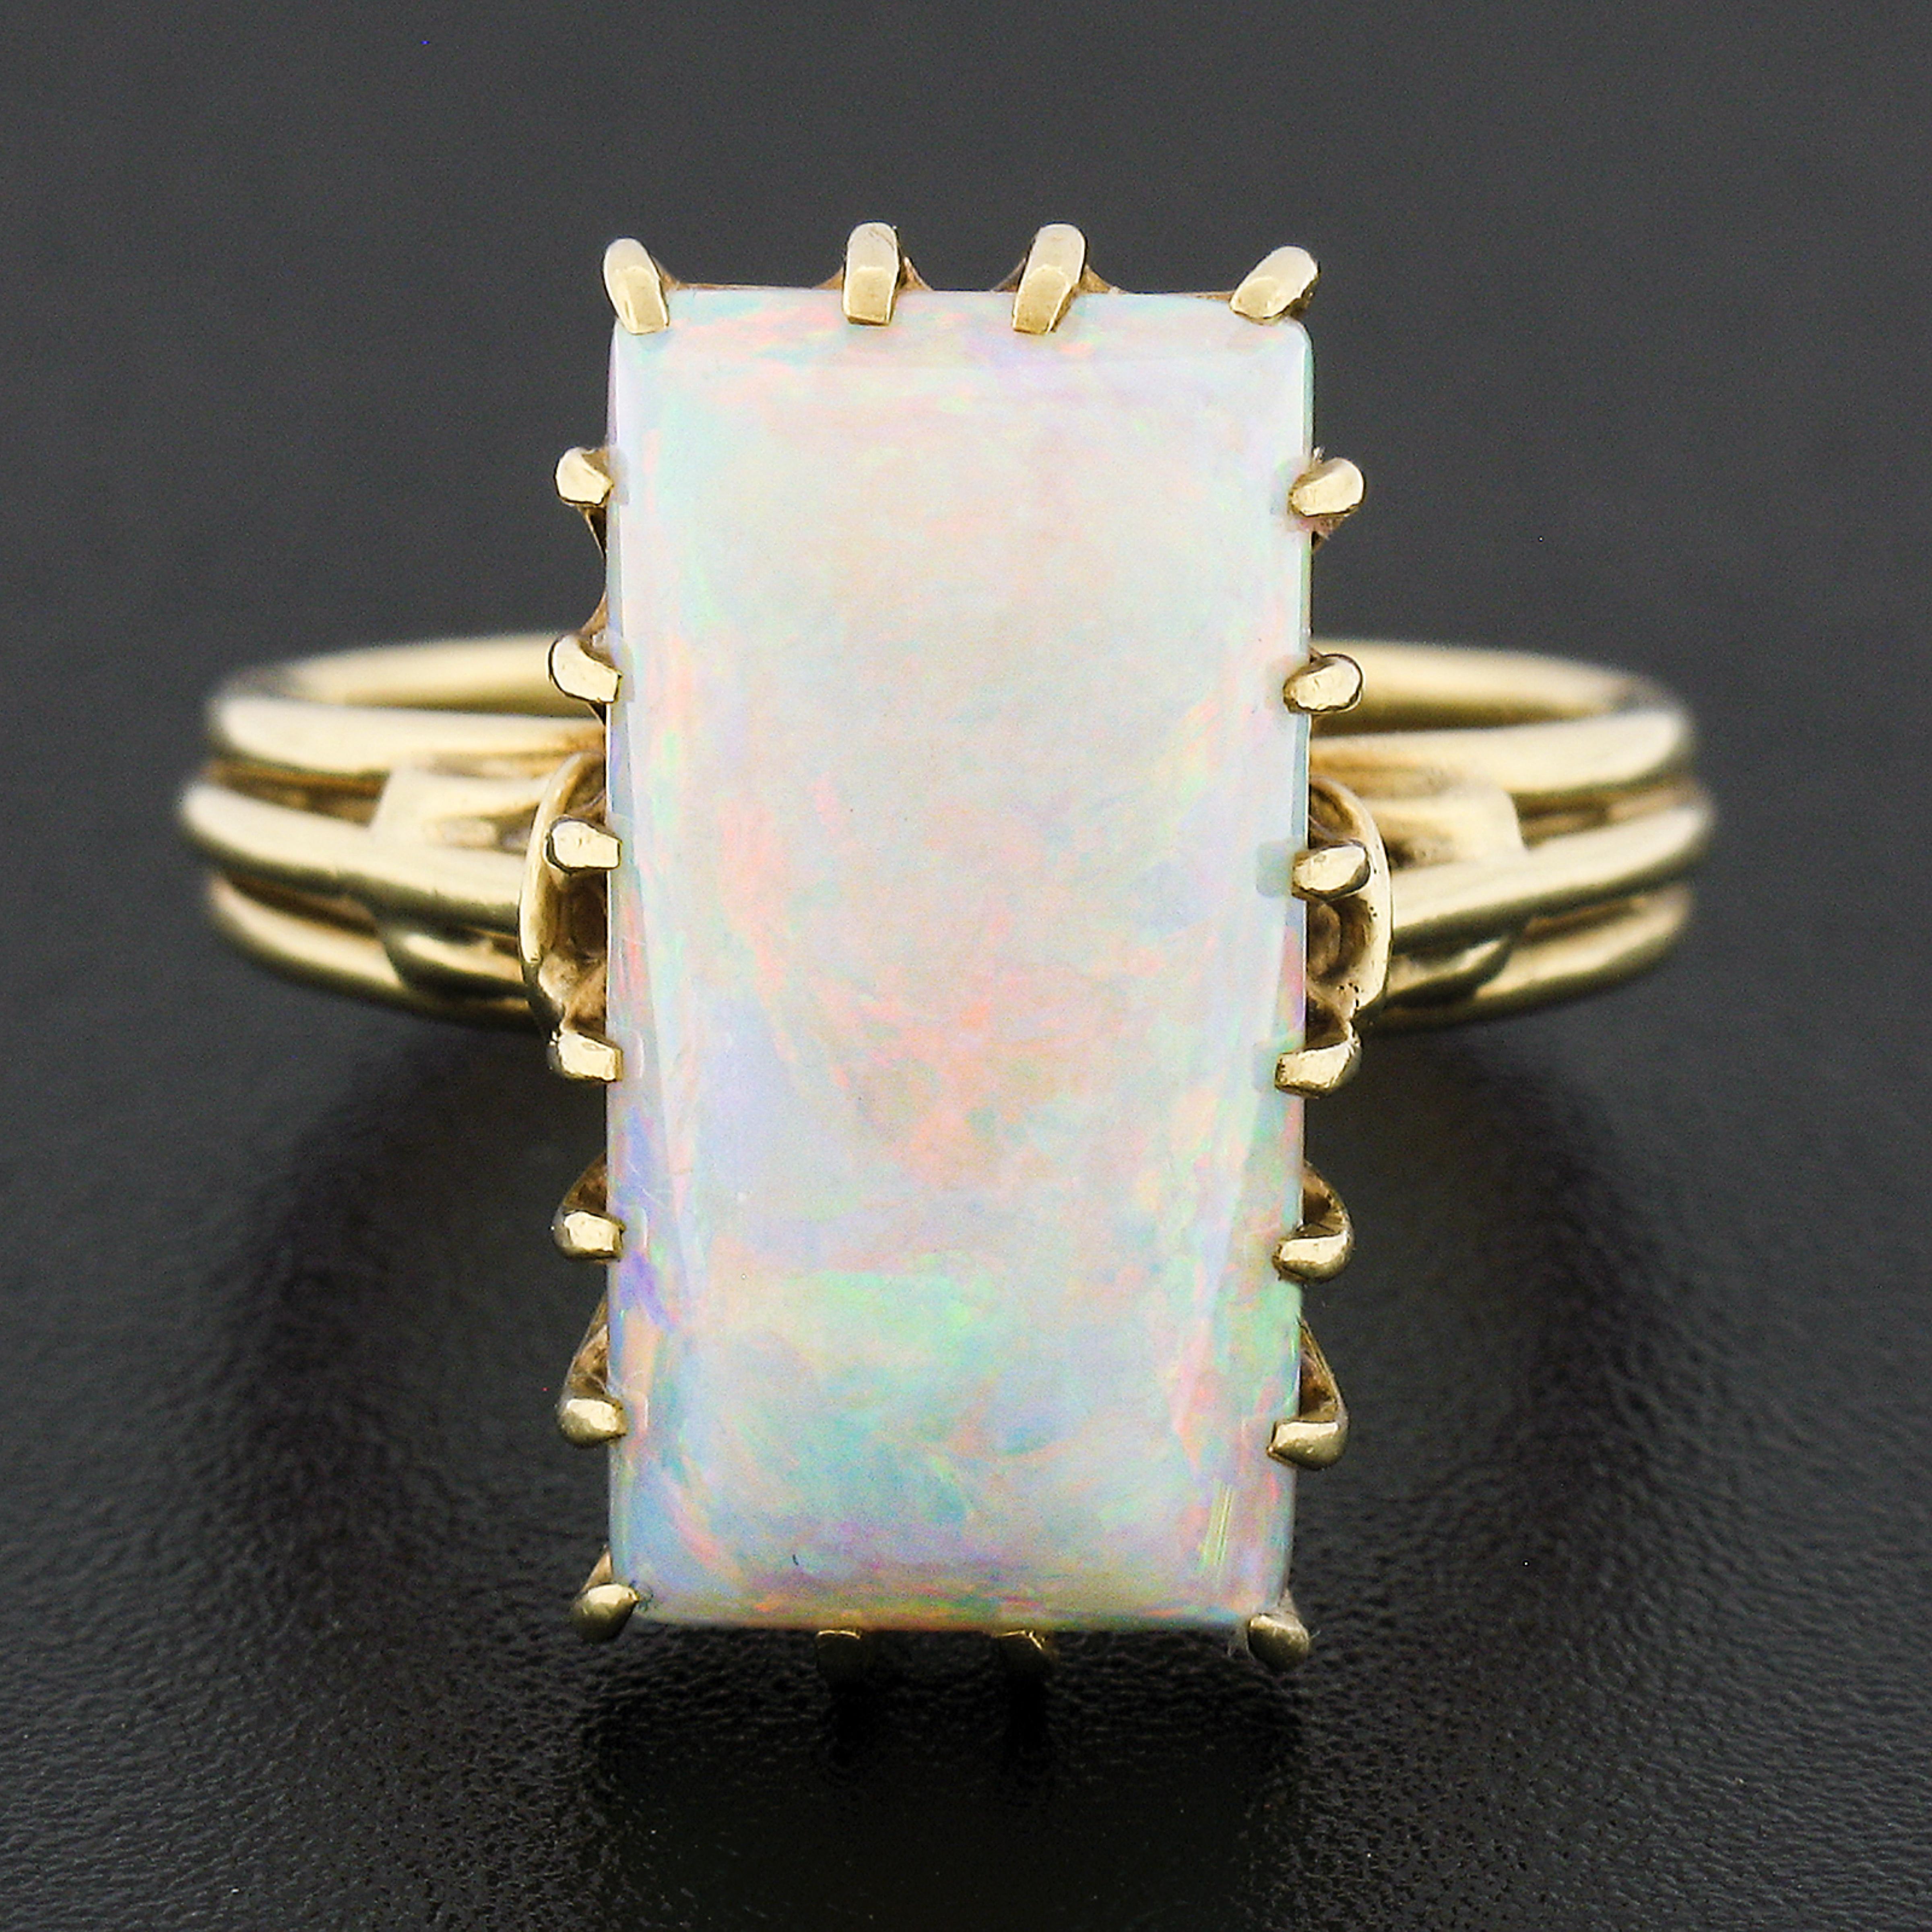 Retro Vintage Handmade 18k Gold Rectangular Cabochon Cut Opal Solitaire Cocktail Ring For Sale